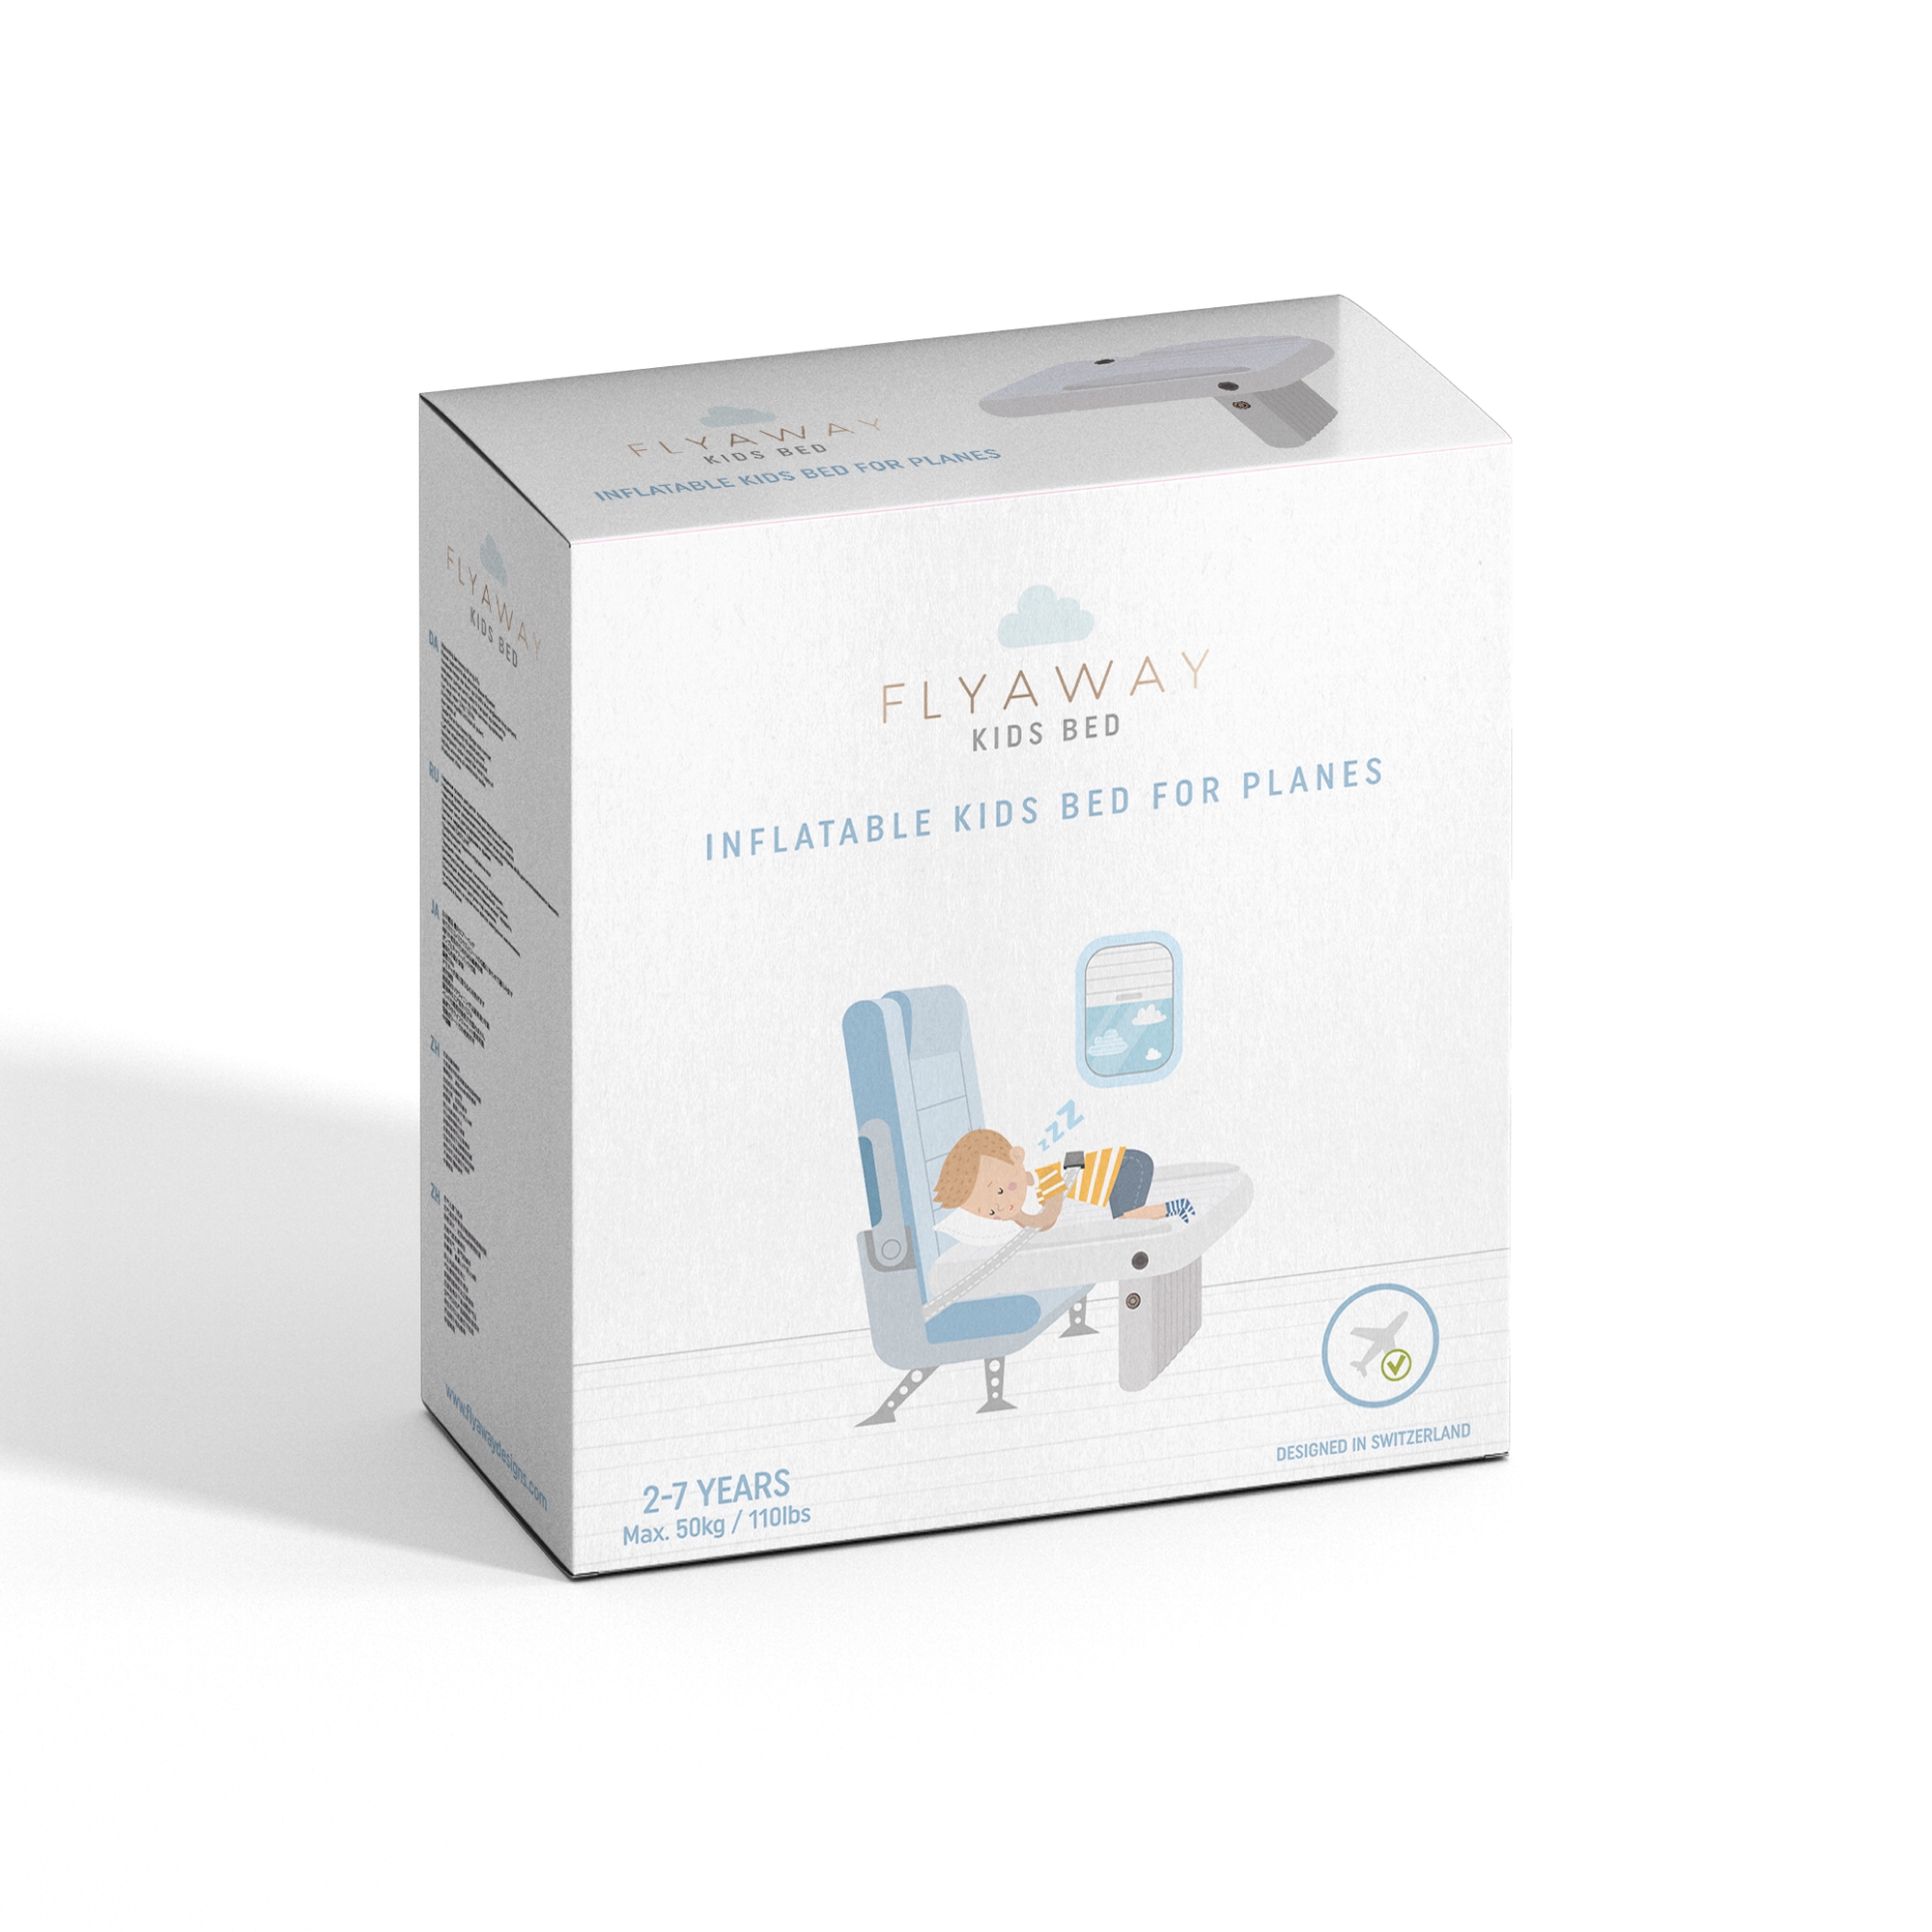 Help your child sleep in the plane with Flyaway Kids Bed 